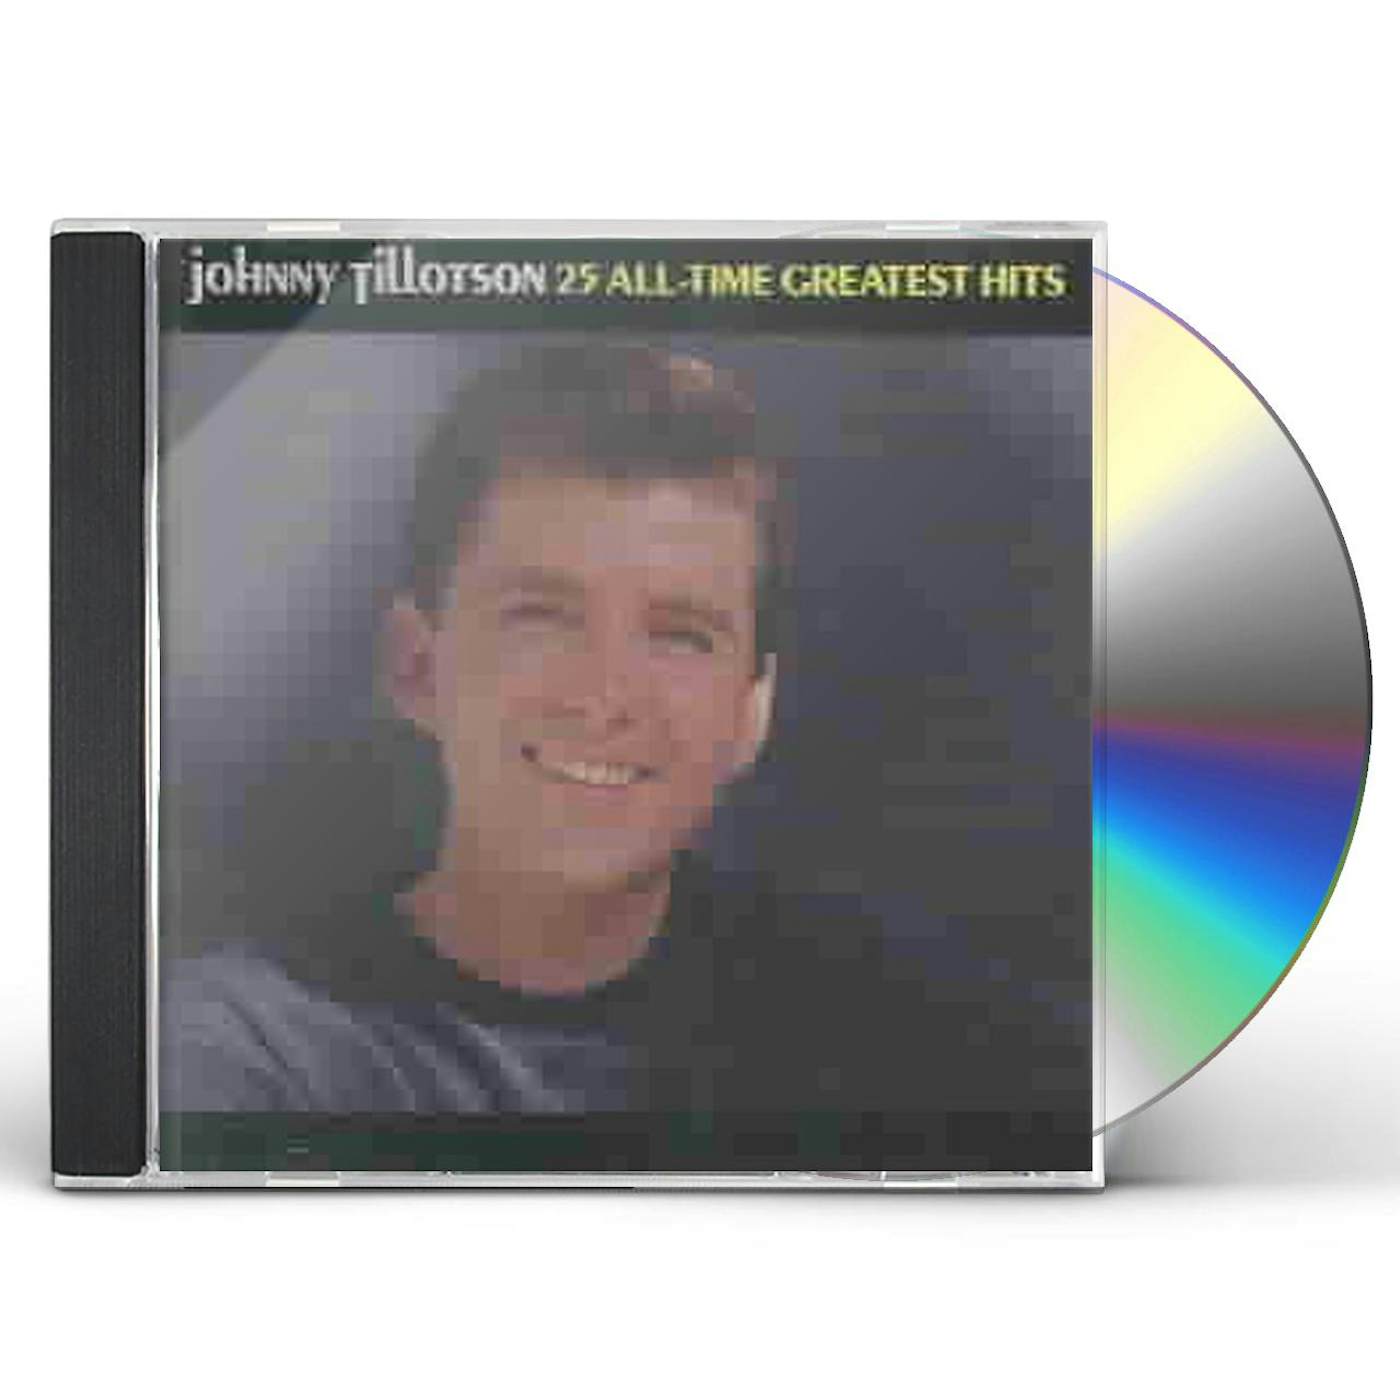 Johnny Tillotson 25 ALL-TIME GREATEST HITS CD